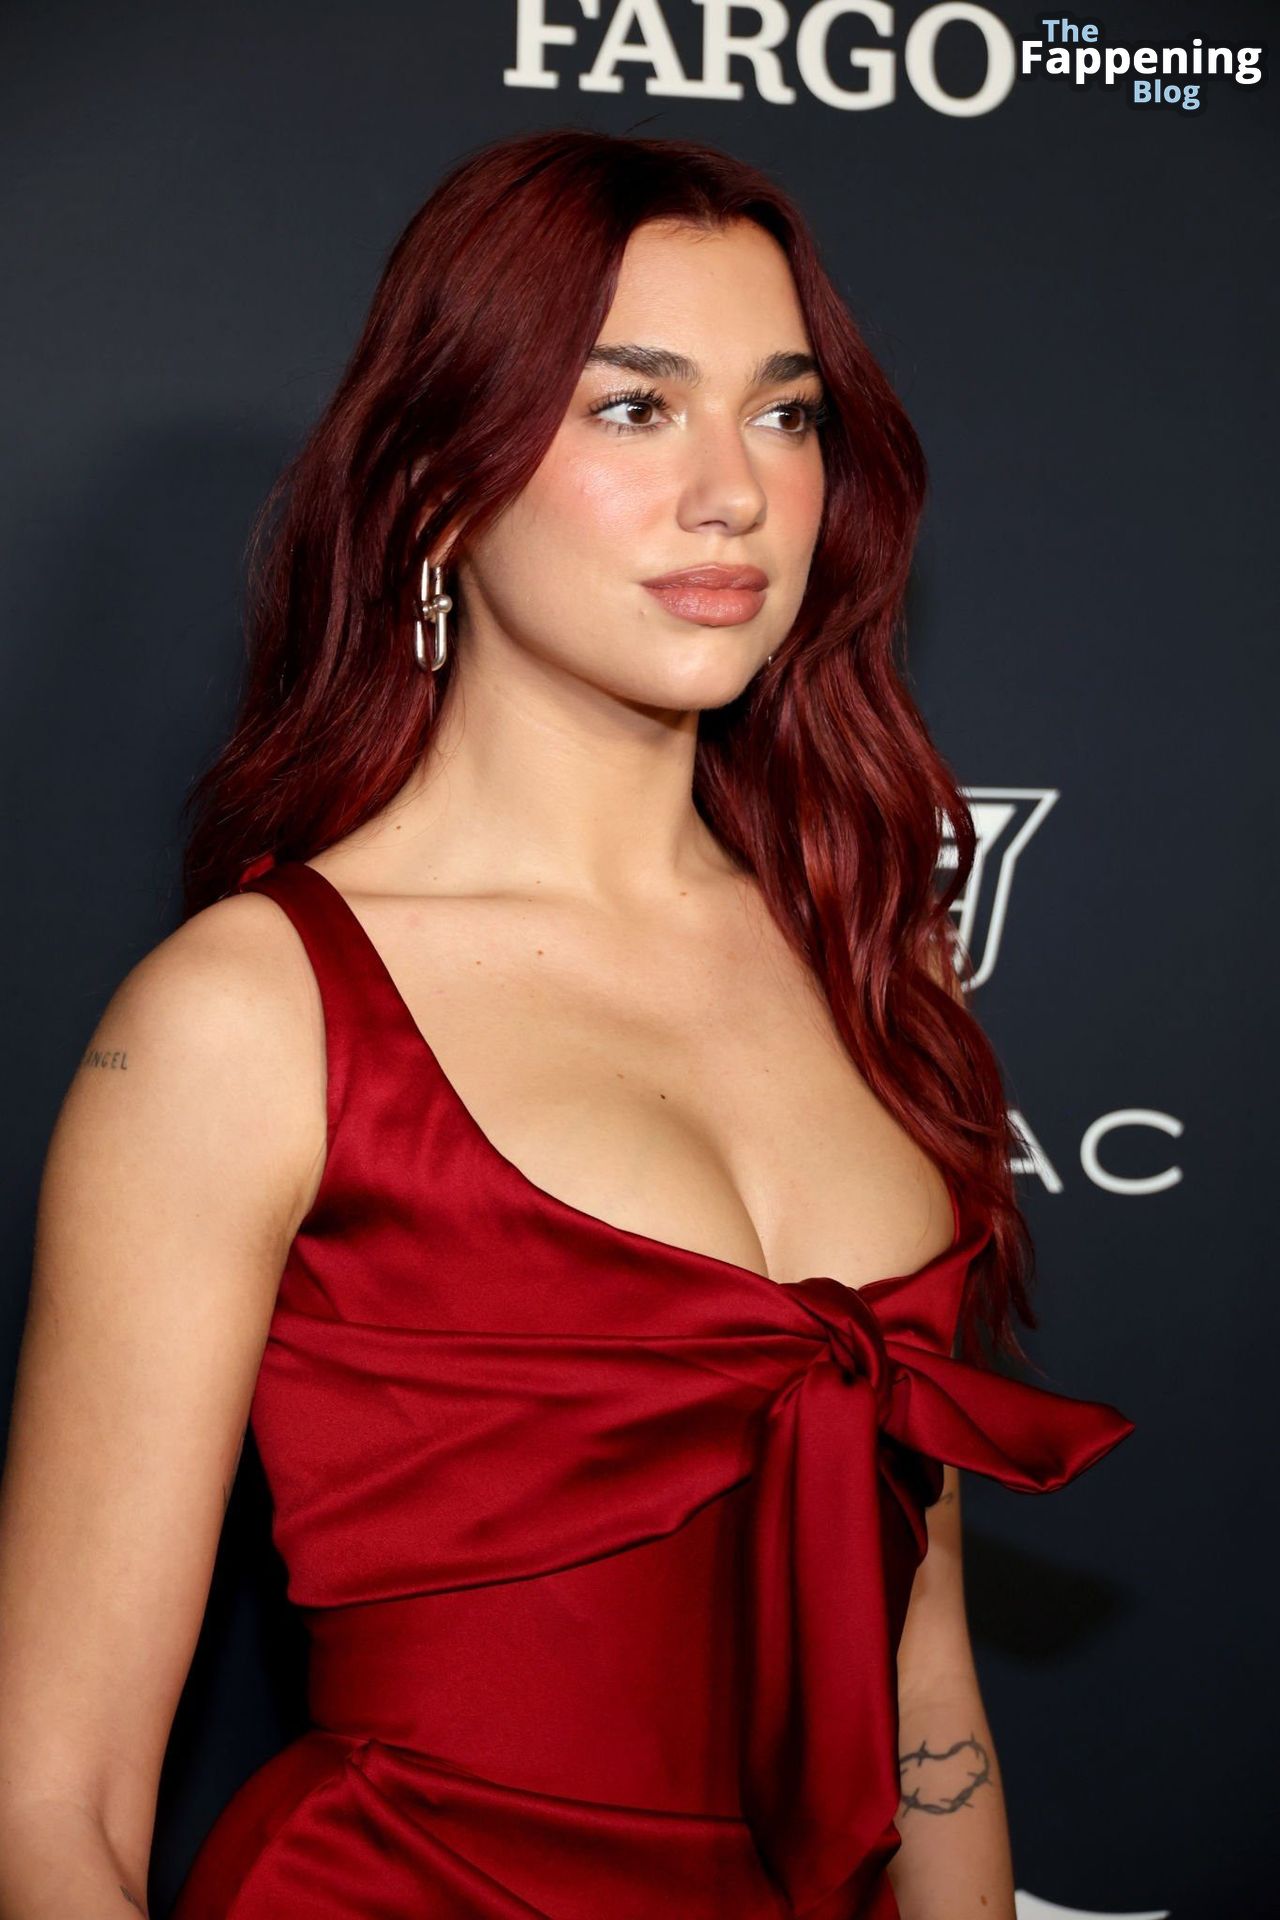 Dua Lipa Looks Hot in a Red Dress at the Variety Power of Women Event (32 Photos)